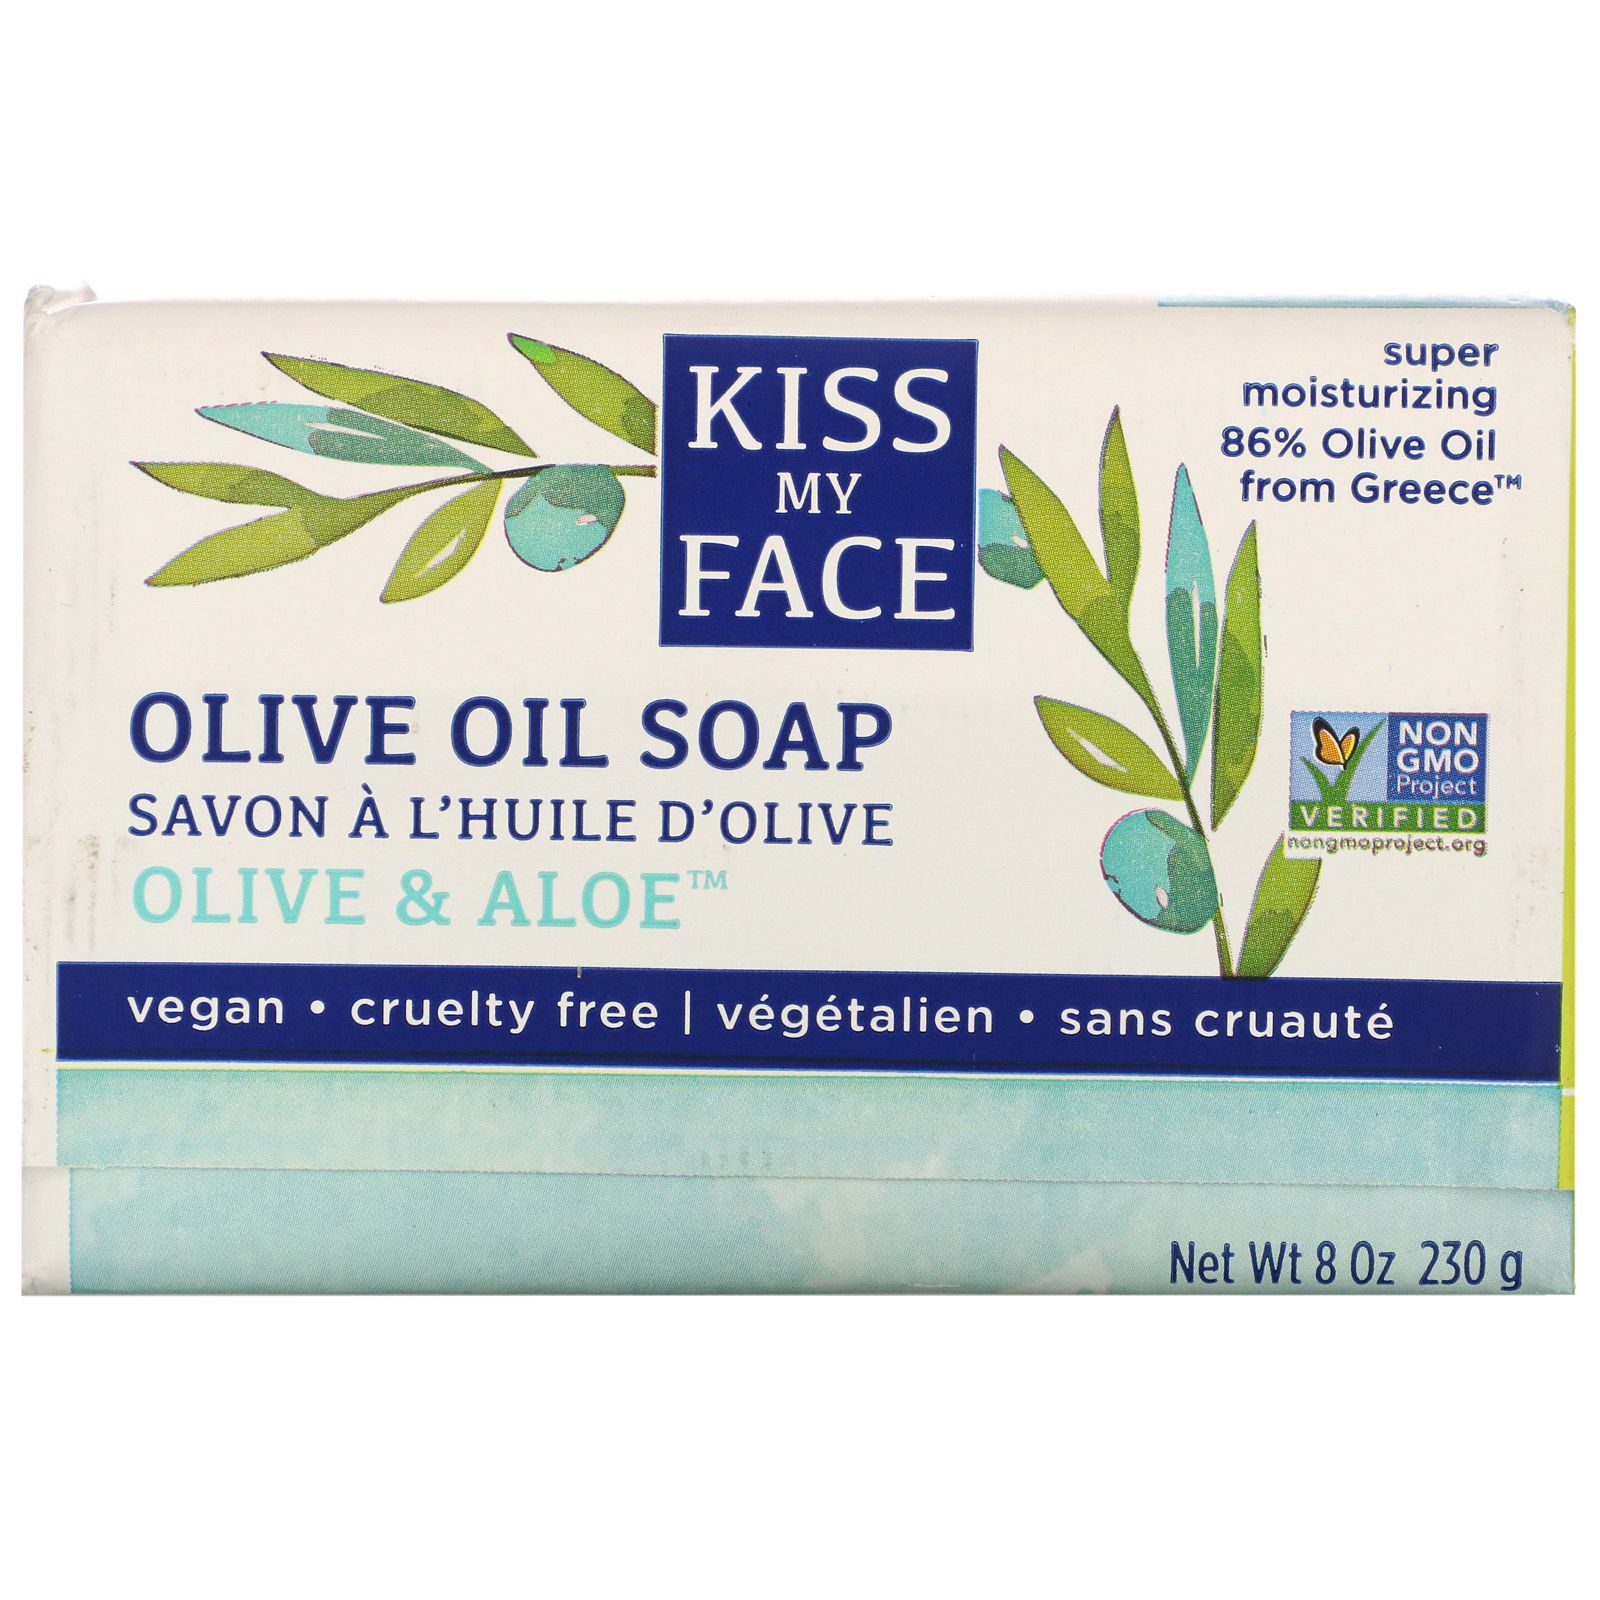 Kiss My Face Olive Oil Soap Olive & Aloe 8 oz (230 g)